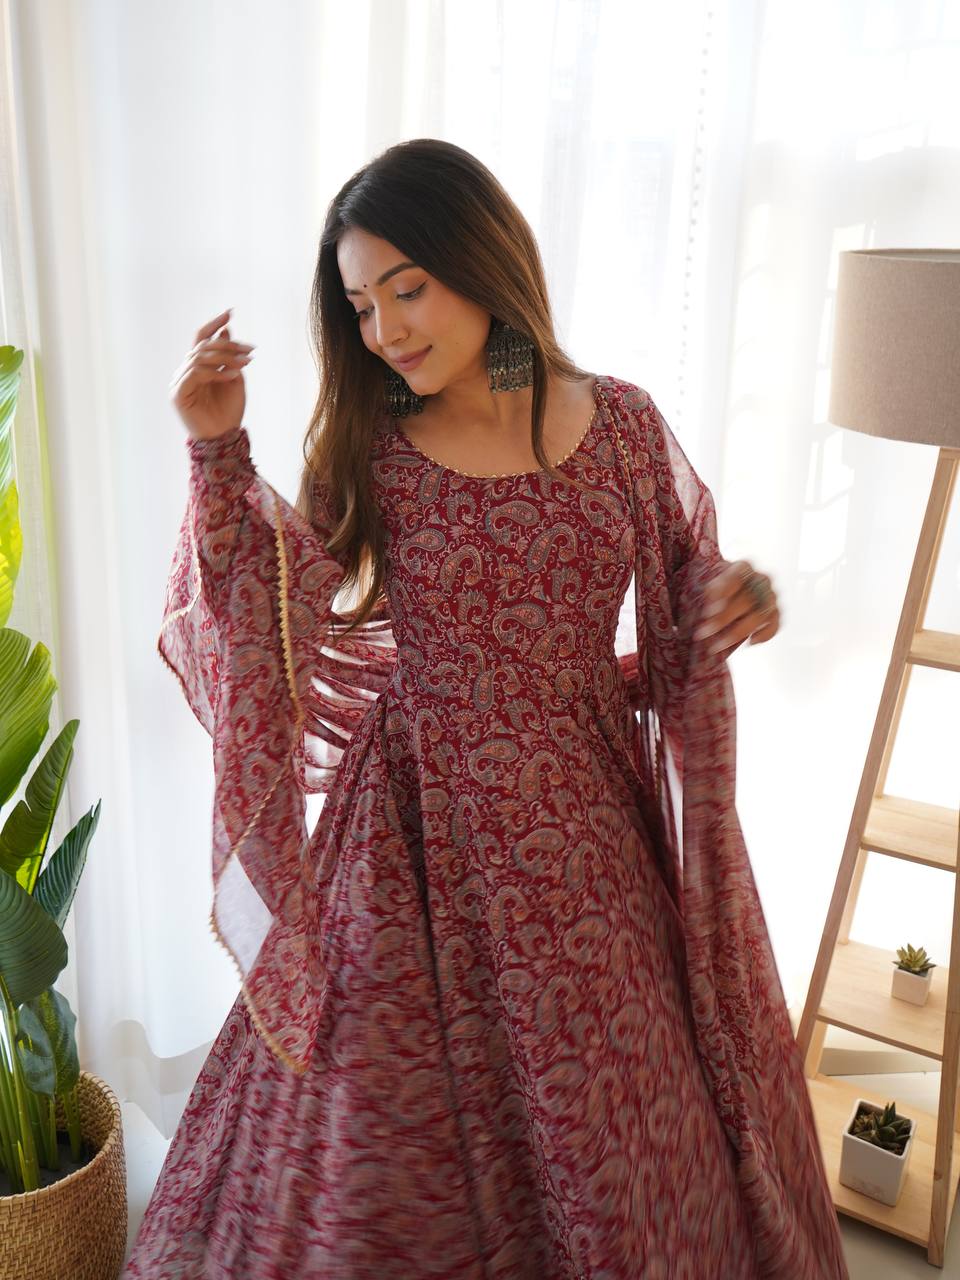 Designer Kurti Patterns for Unique Classy Looks at the Wedding